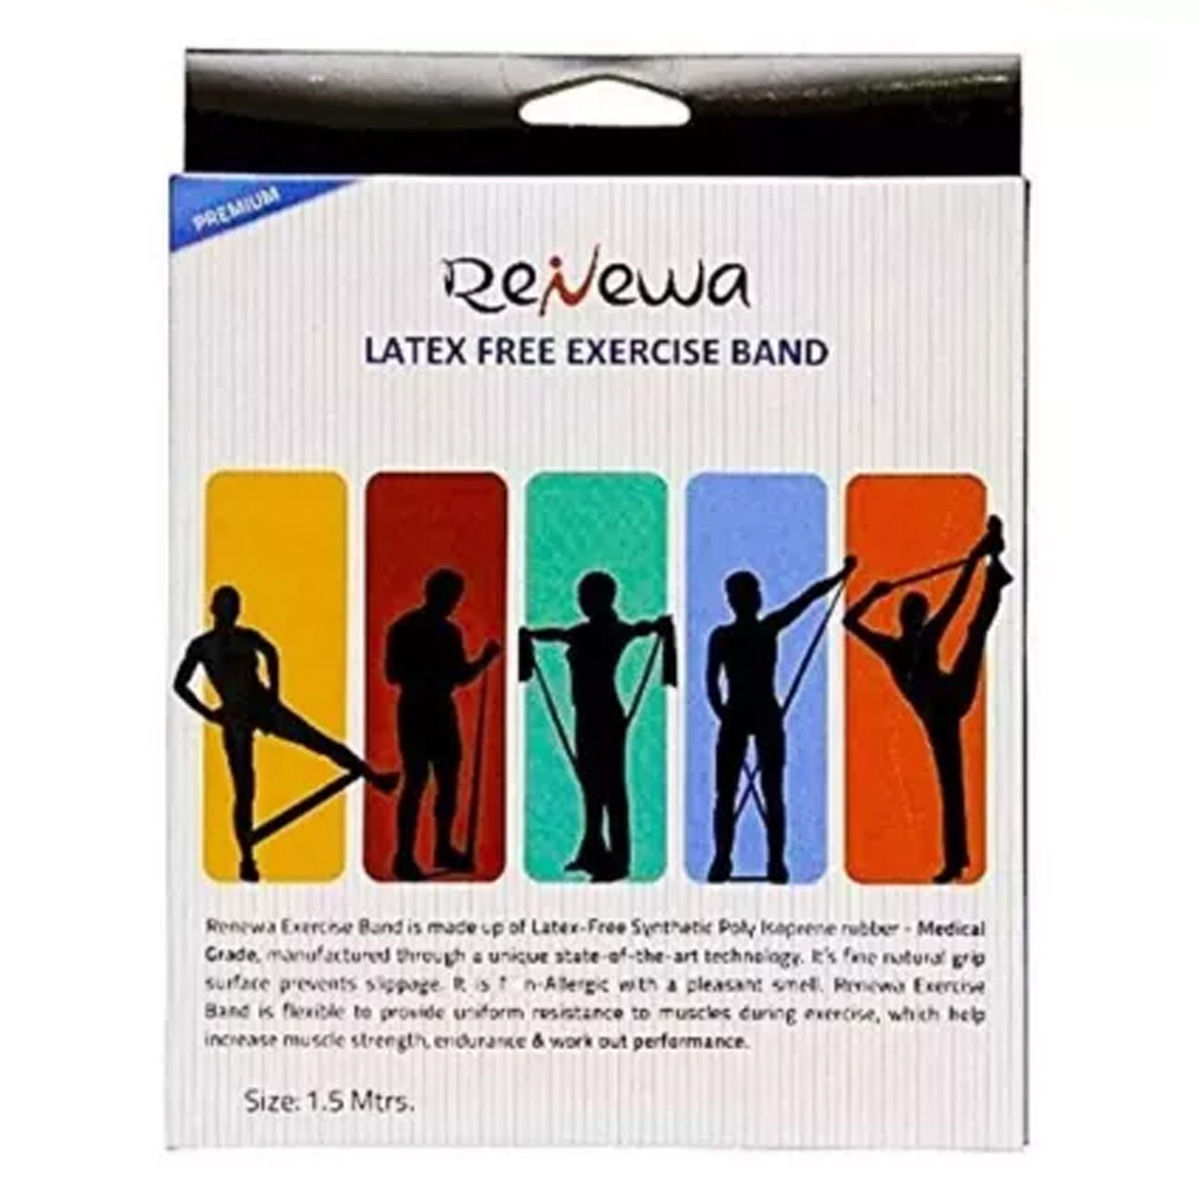 Buy Renewa Latex Free Exercise Blue Band, 1 Count Online